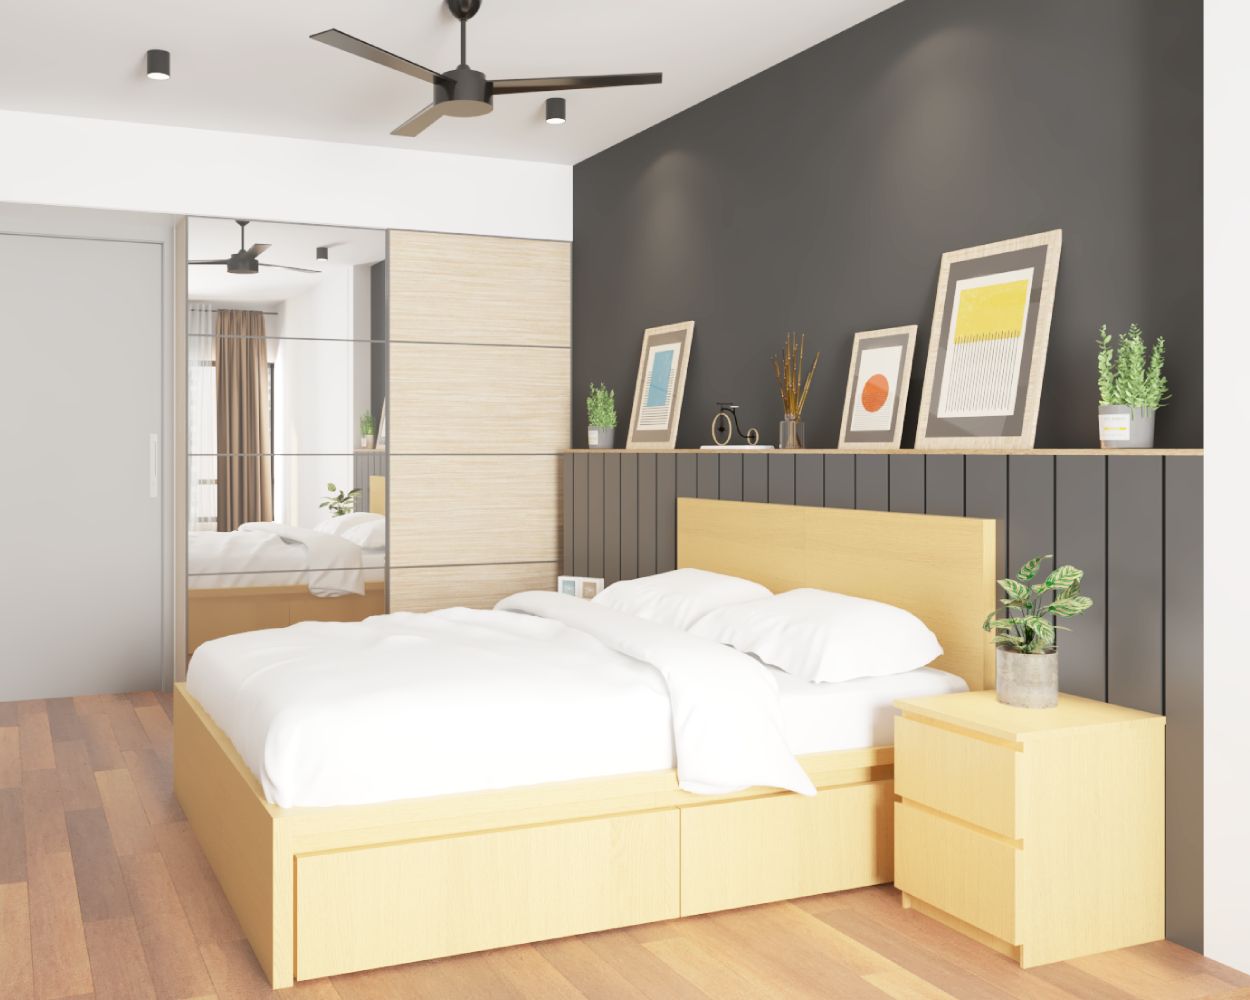 Contemporary Bedroom Design With A Wooden Queen Size Bed